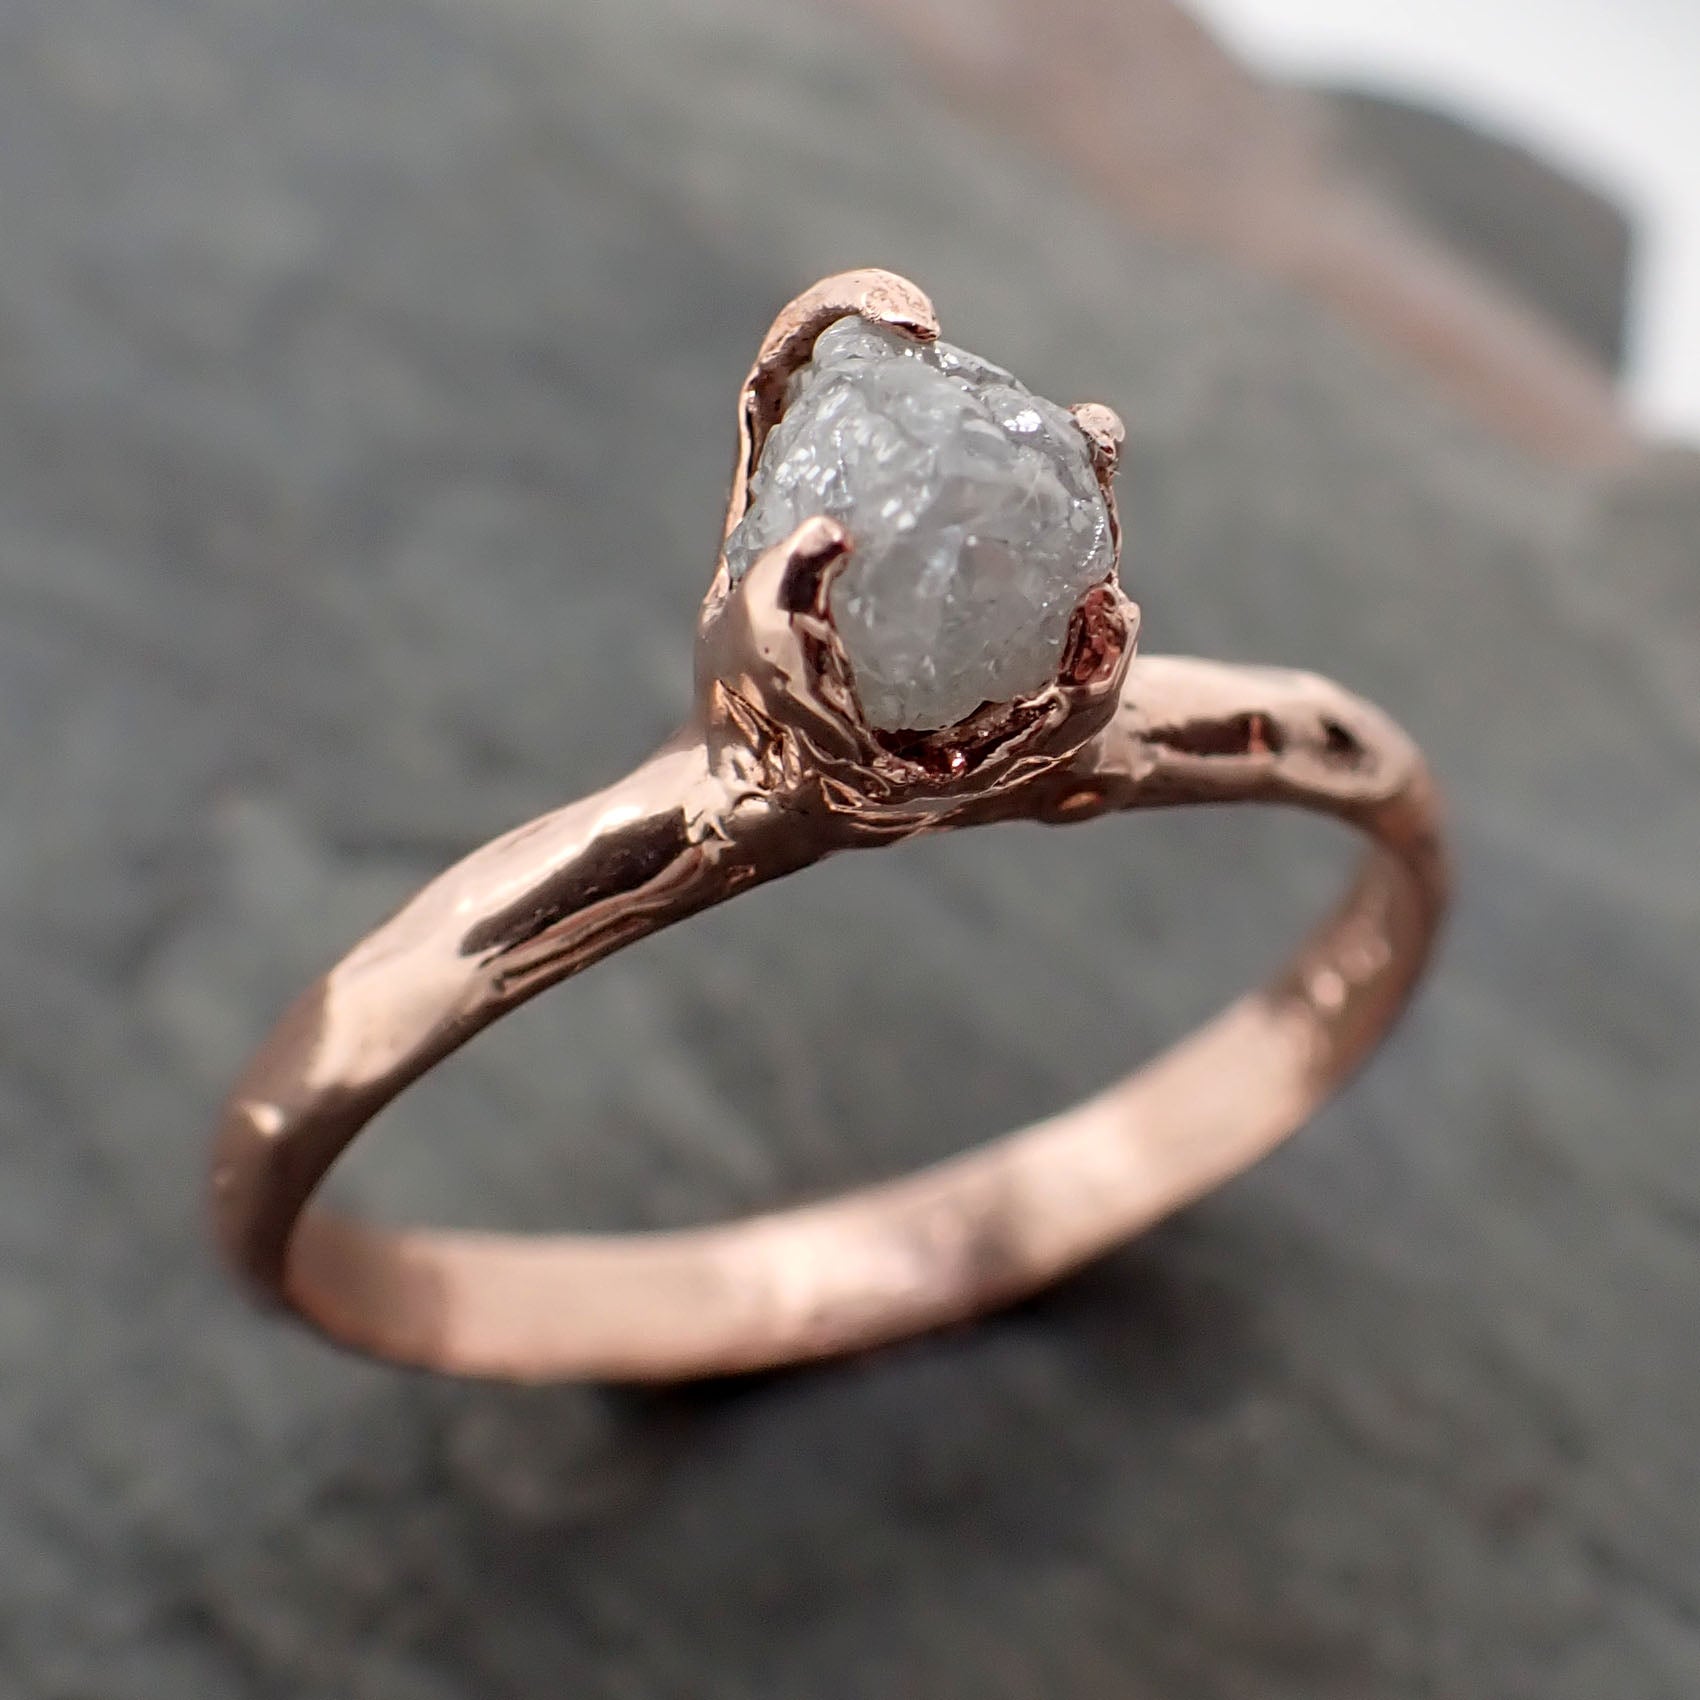 raw diamond solitaire engagement ring rough 14k rose gold wedding ring diamond stacking ring rough diamond ring byangeline 2347 Alternative Engagement